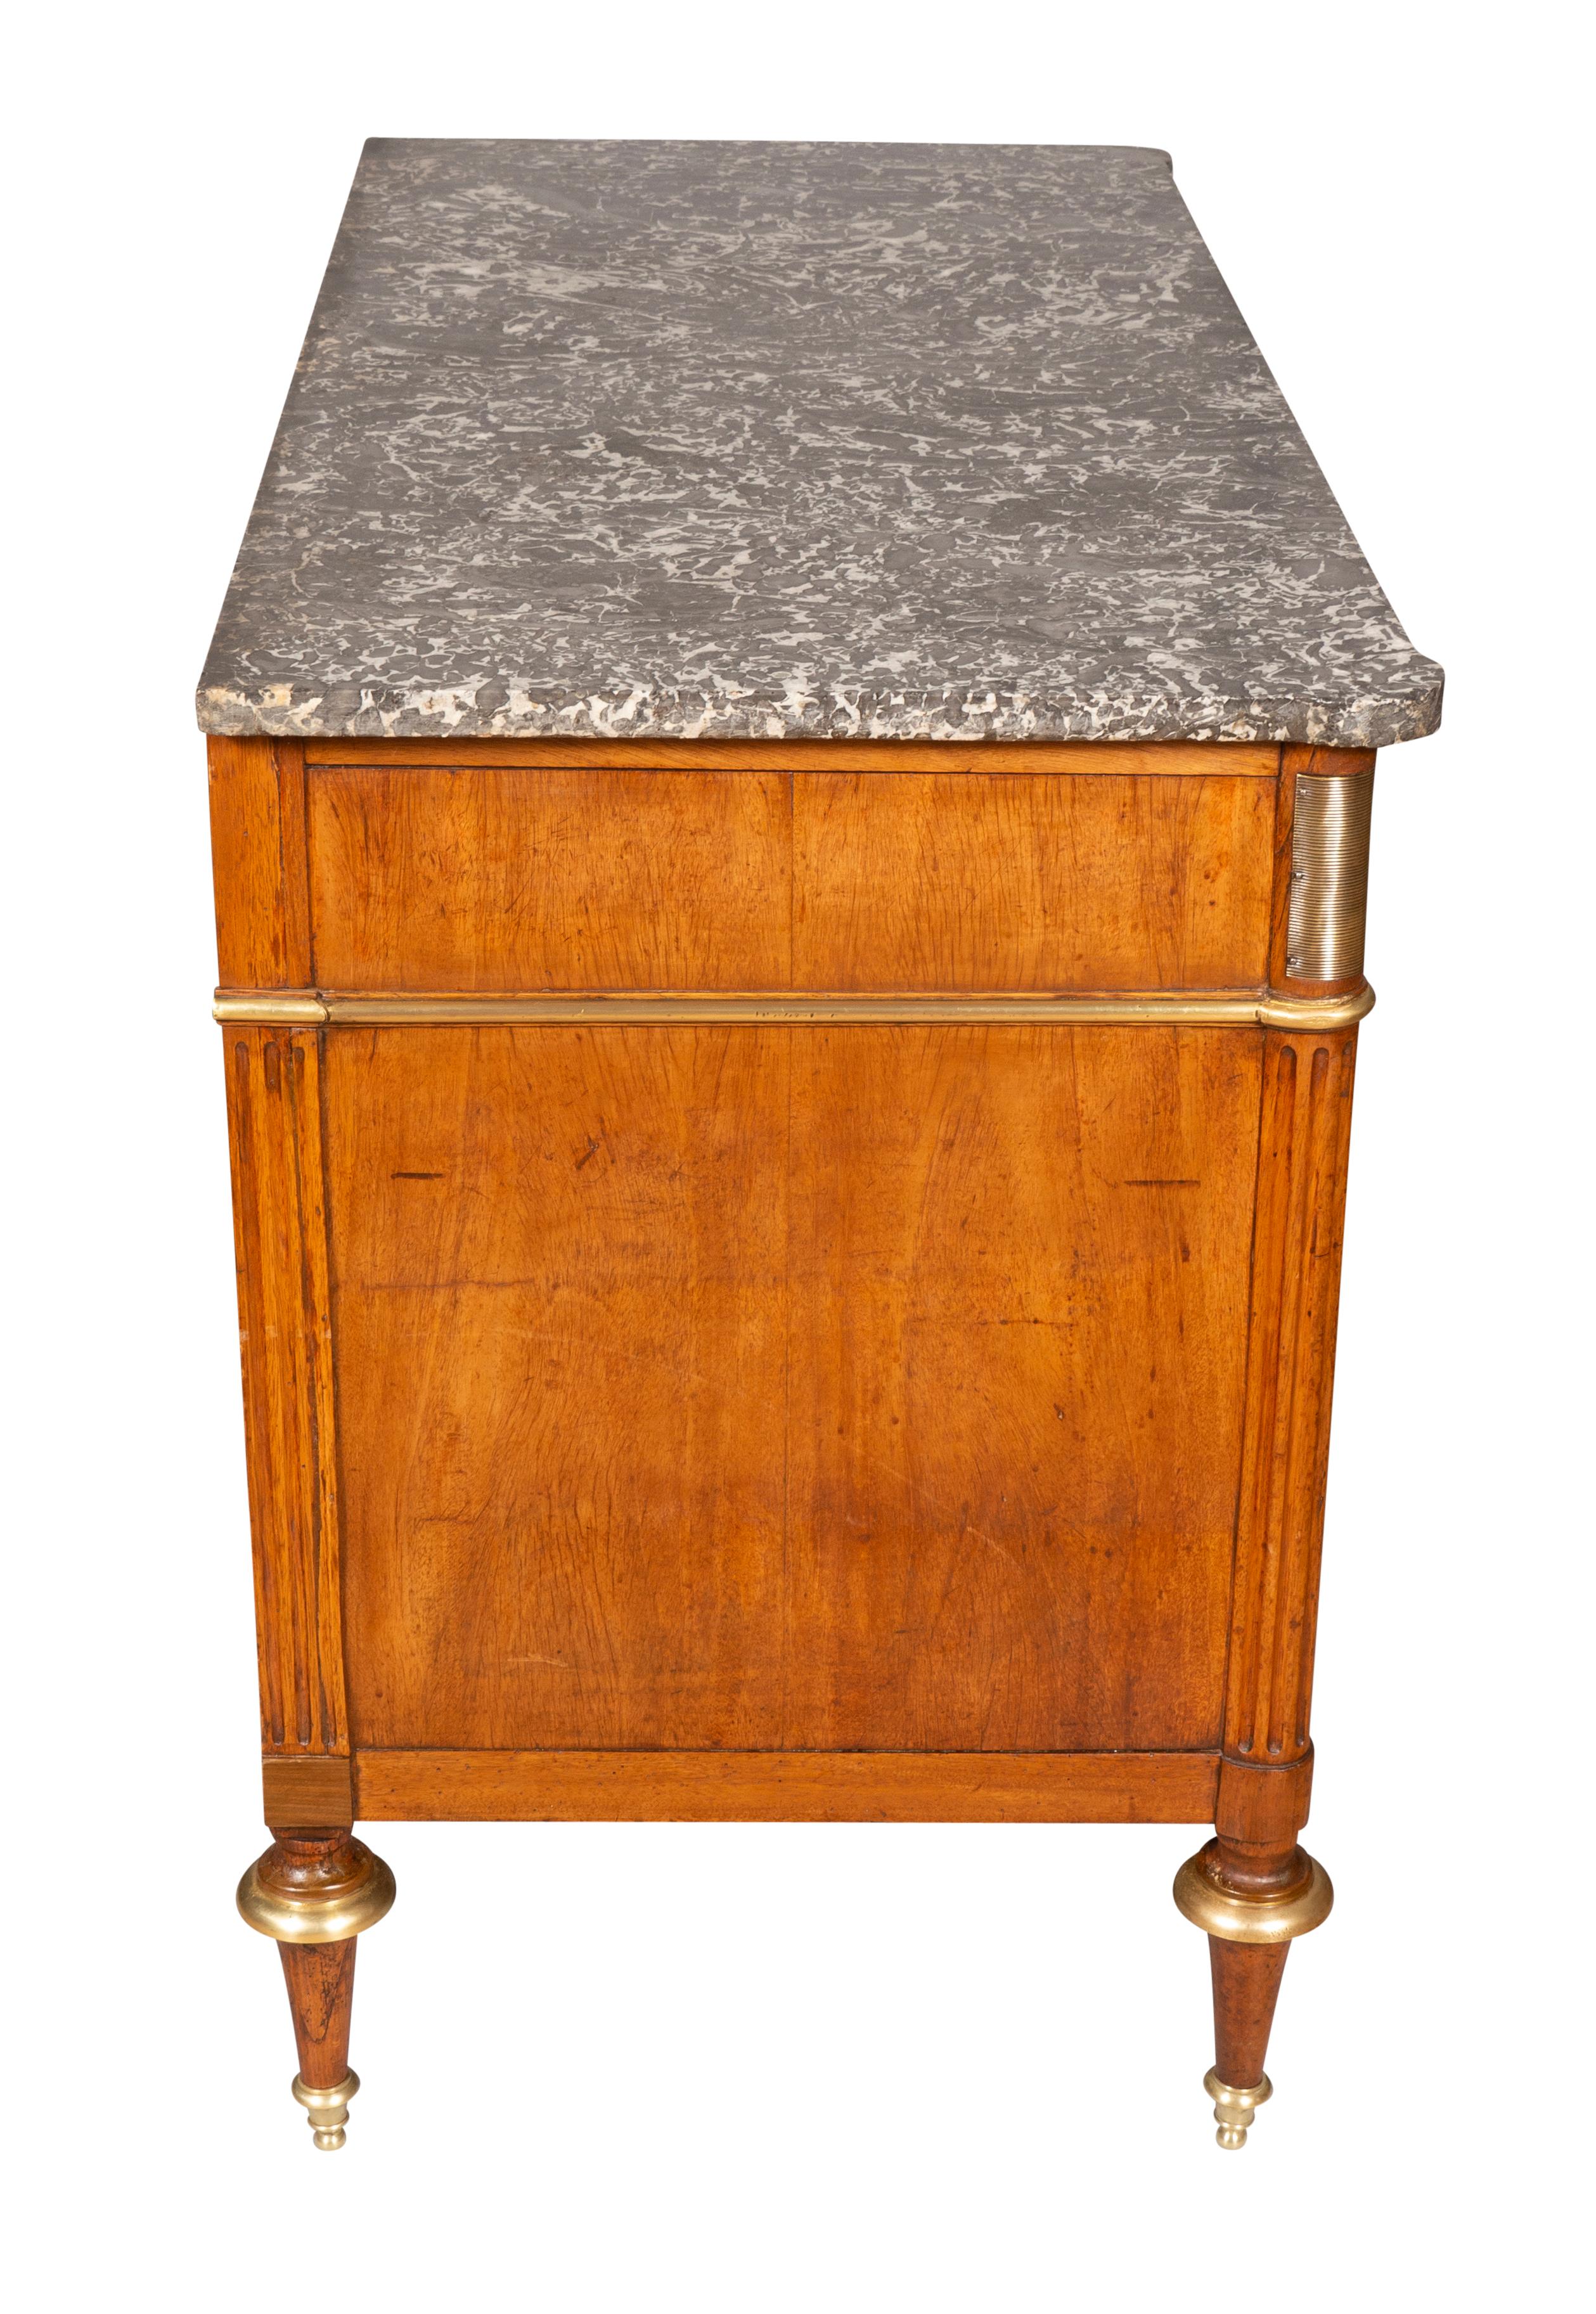 Late 18th Century Directoire Mahogany and Brass Mounted Commode